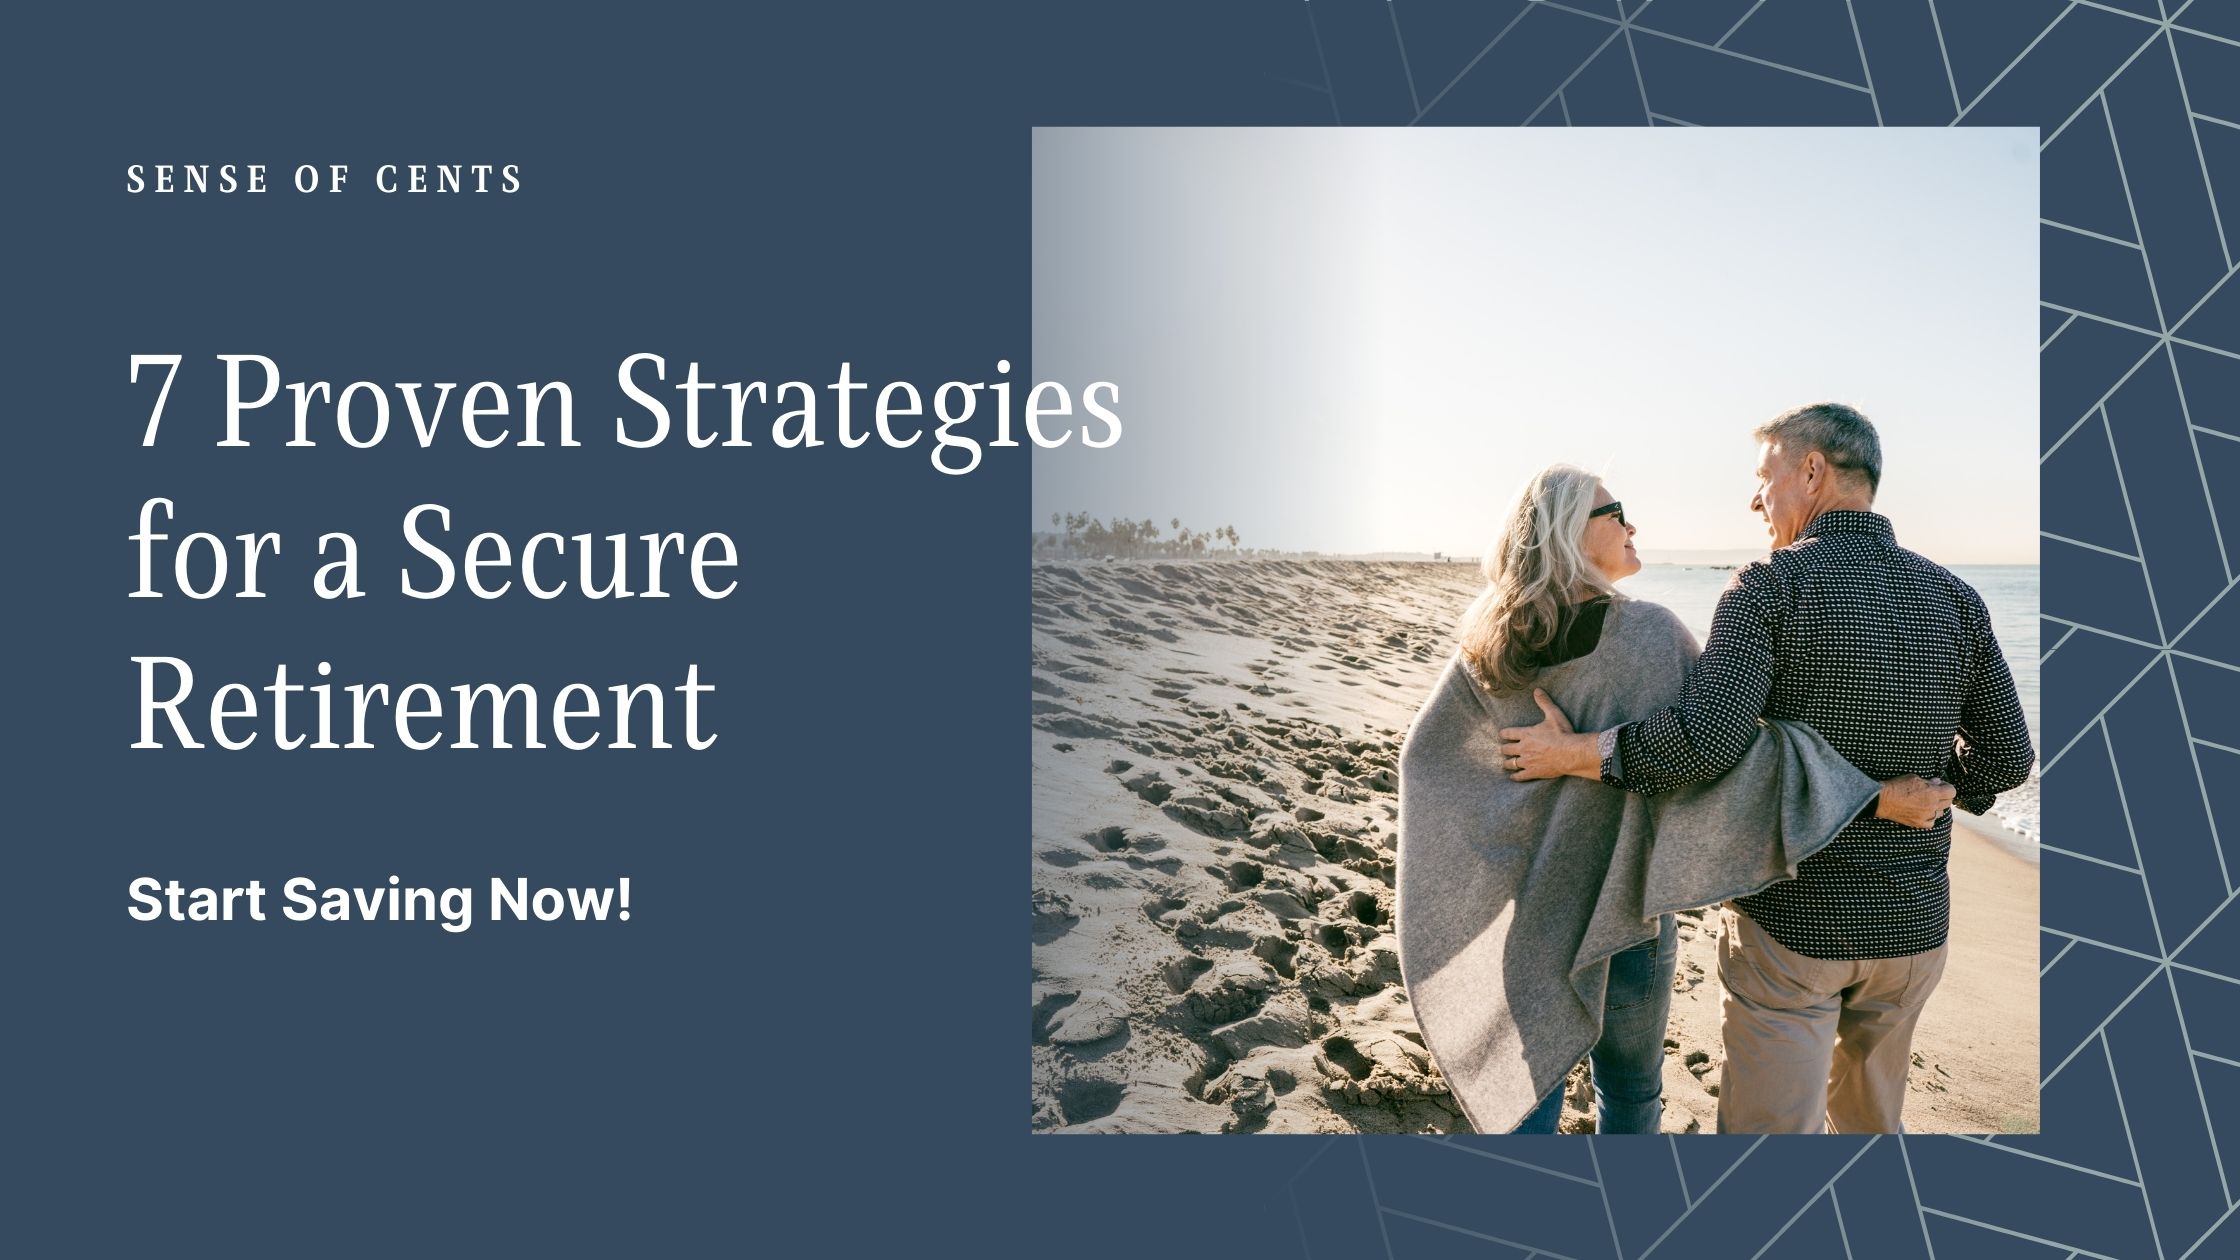 7 Proven Strategies for a Secure Retirement